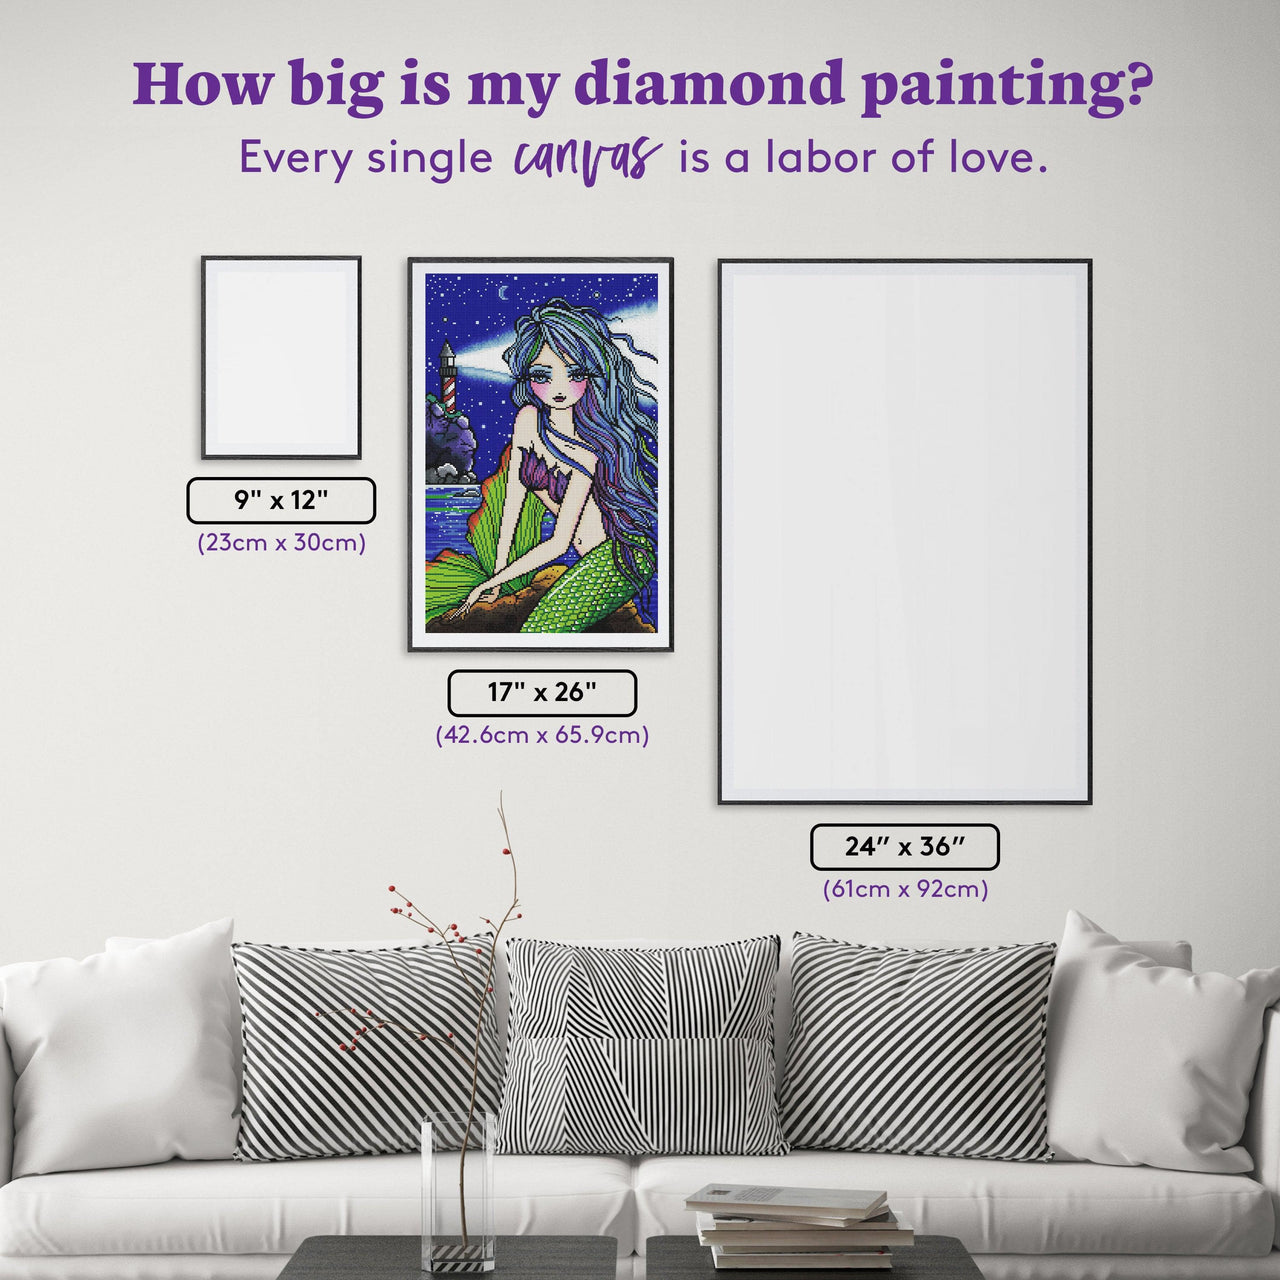 Diamond Painting Rochelle 17" x 26" (42.6cm x 65.9cm) / Round with 51 Colors including 4 ABs / 35,720